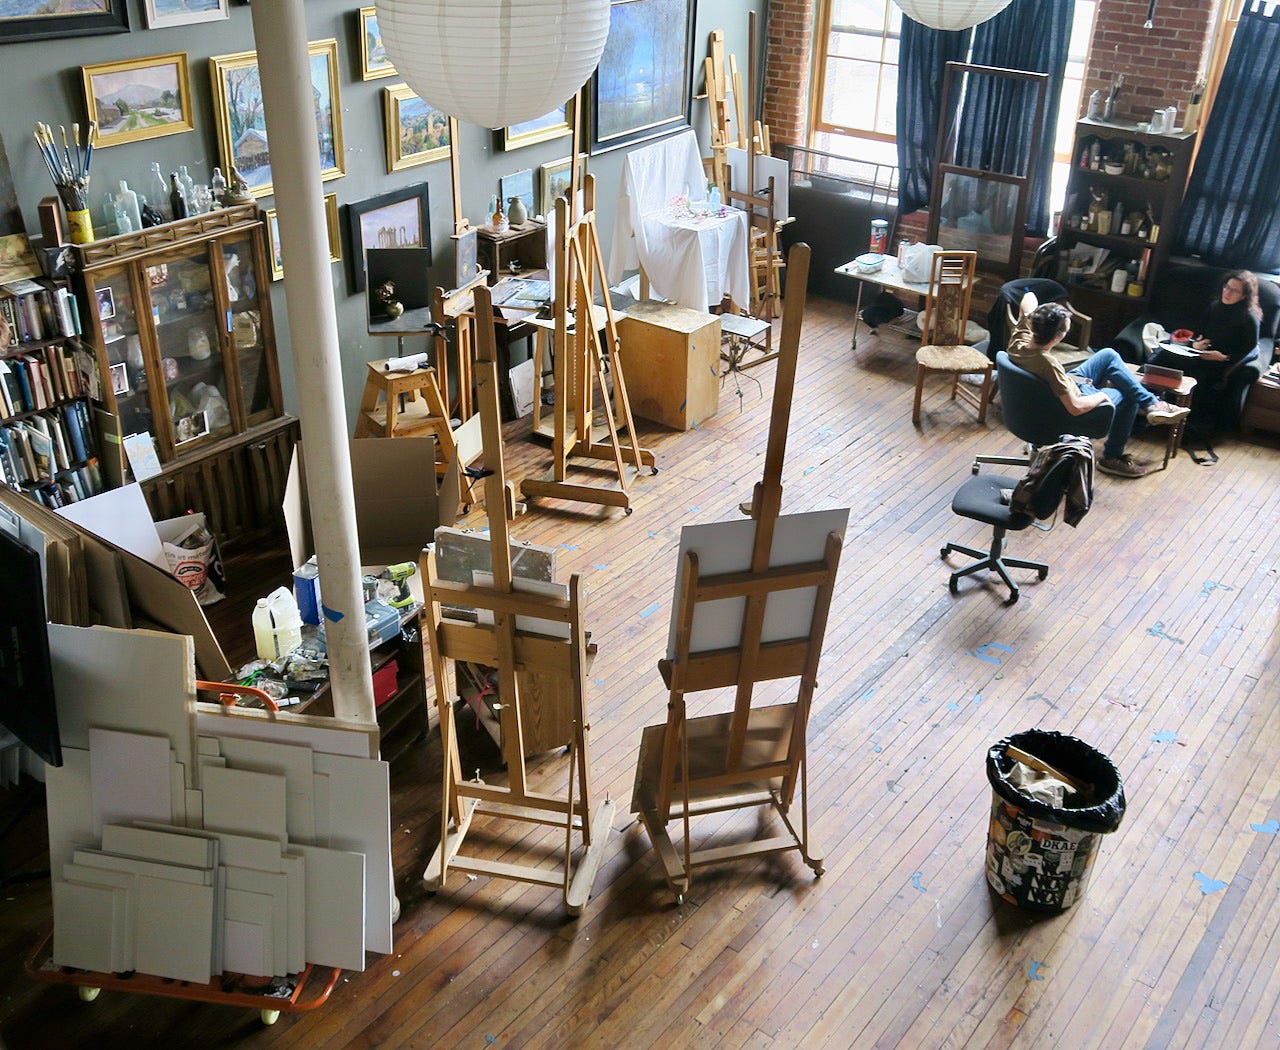 An art studio with easels and a person sitting in a chair

Description automatically generated